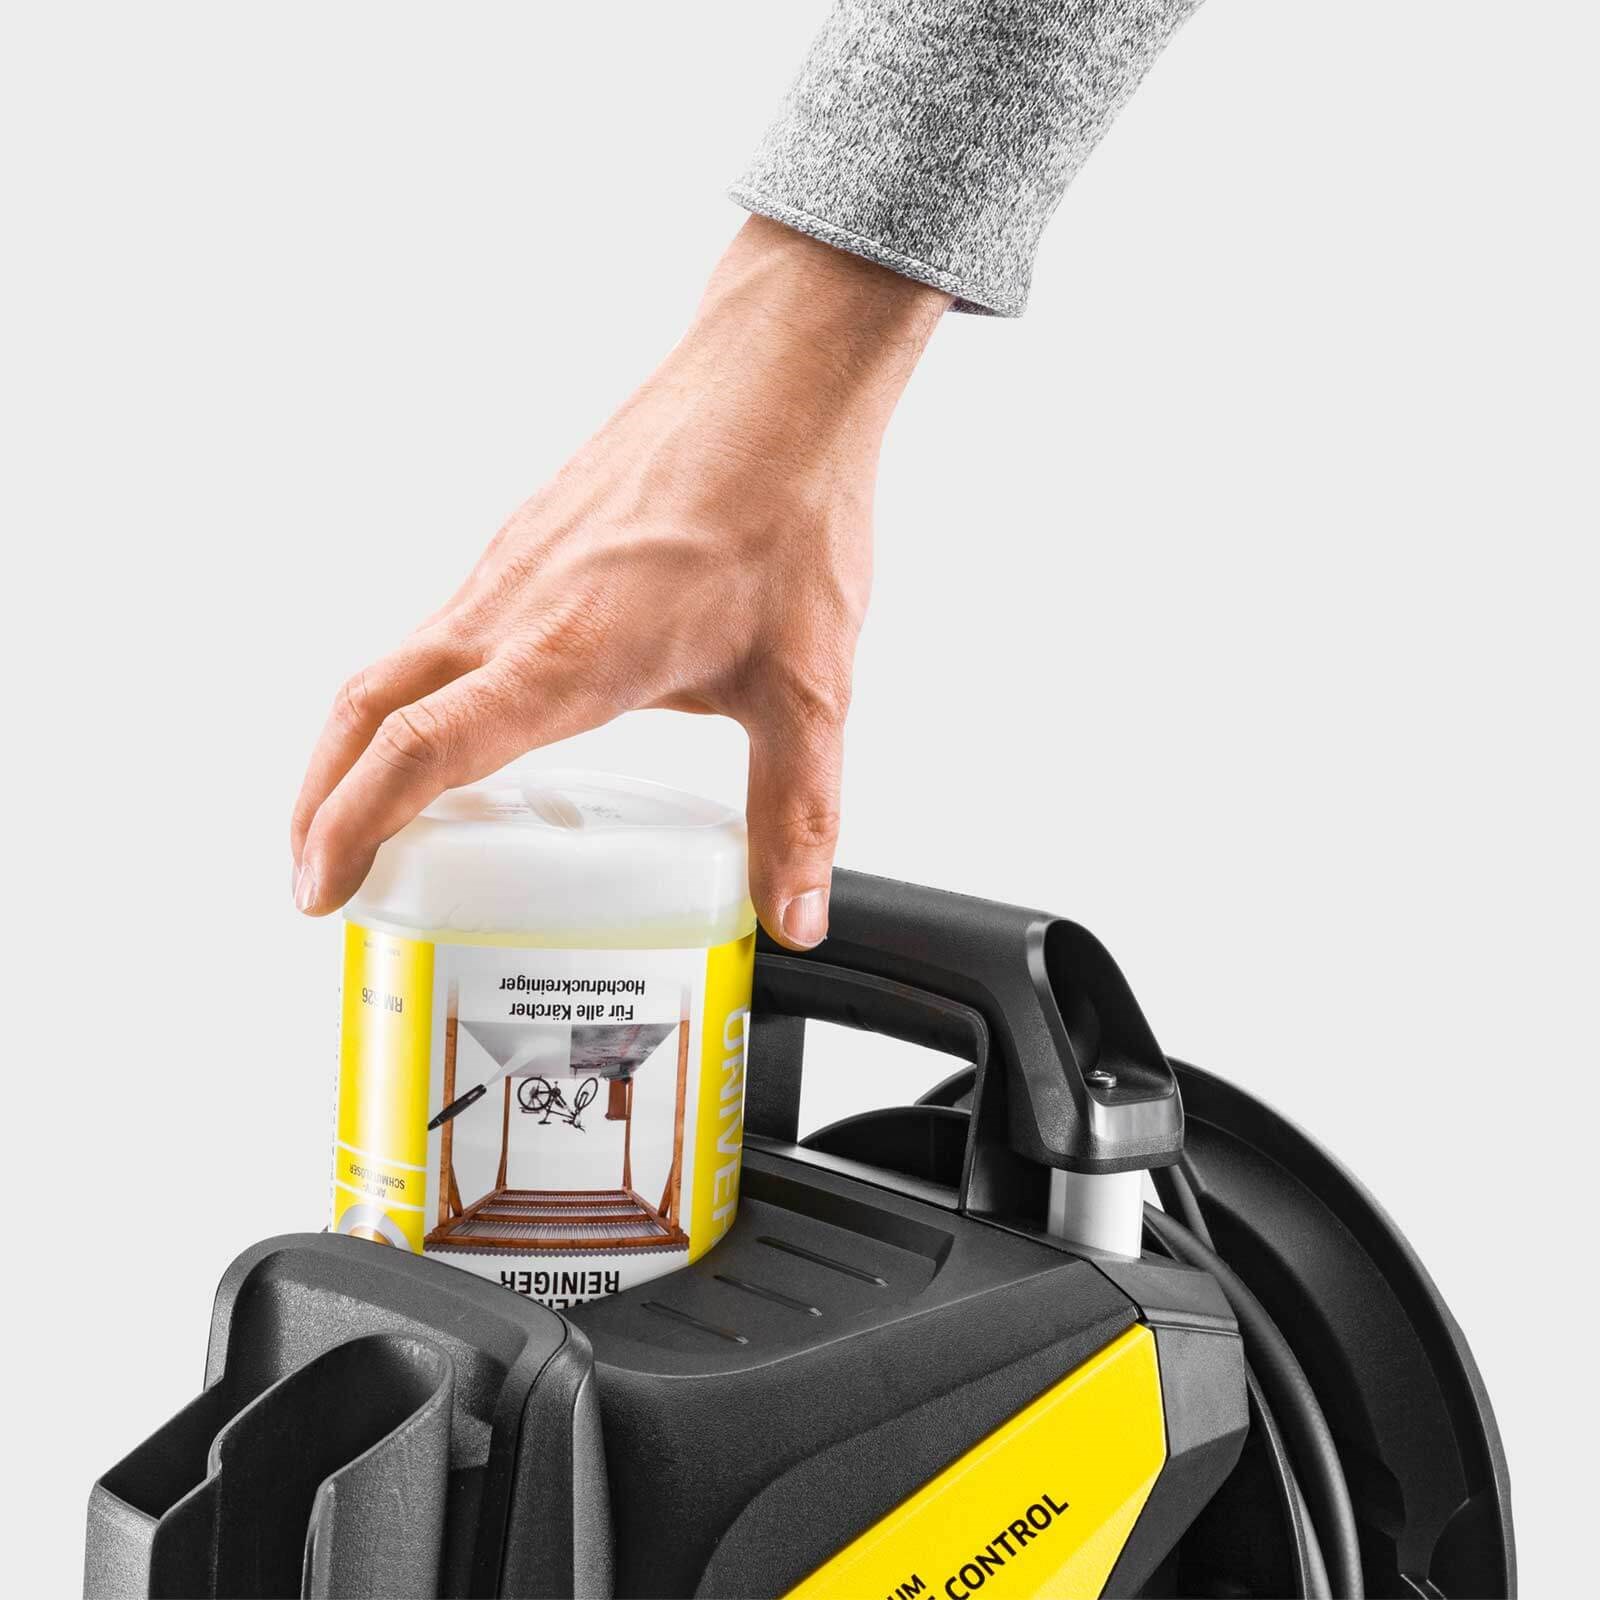 Karcher K7 Premium Full Control Pressure Washer Unboxing and testing 